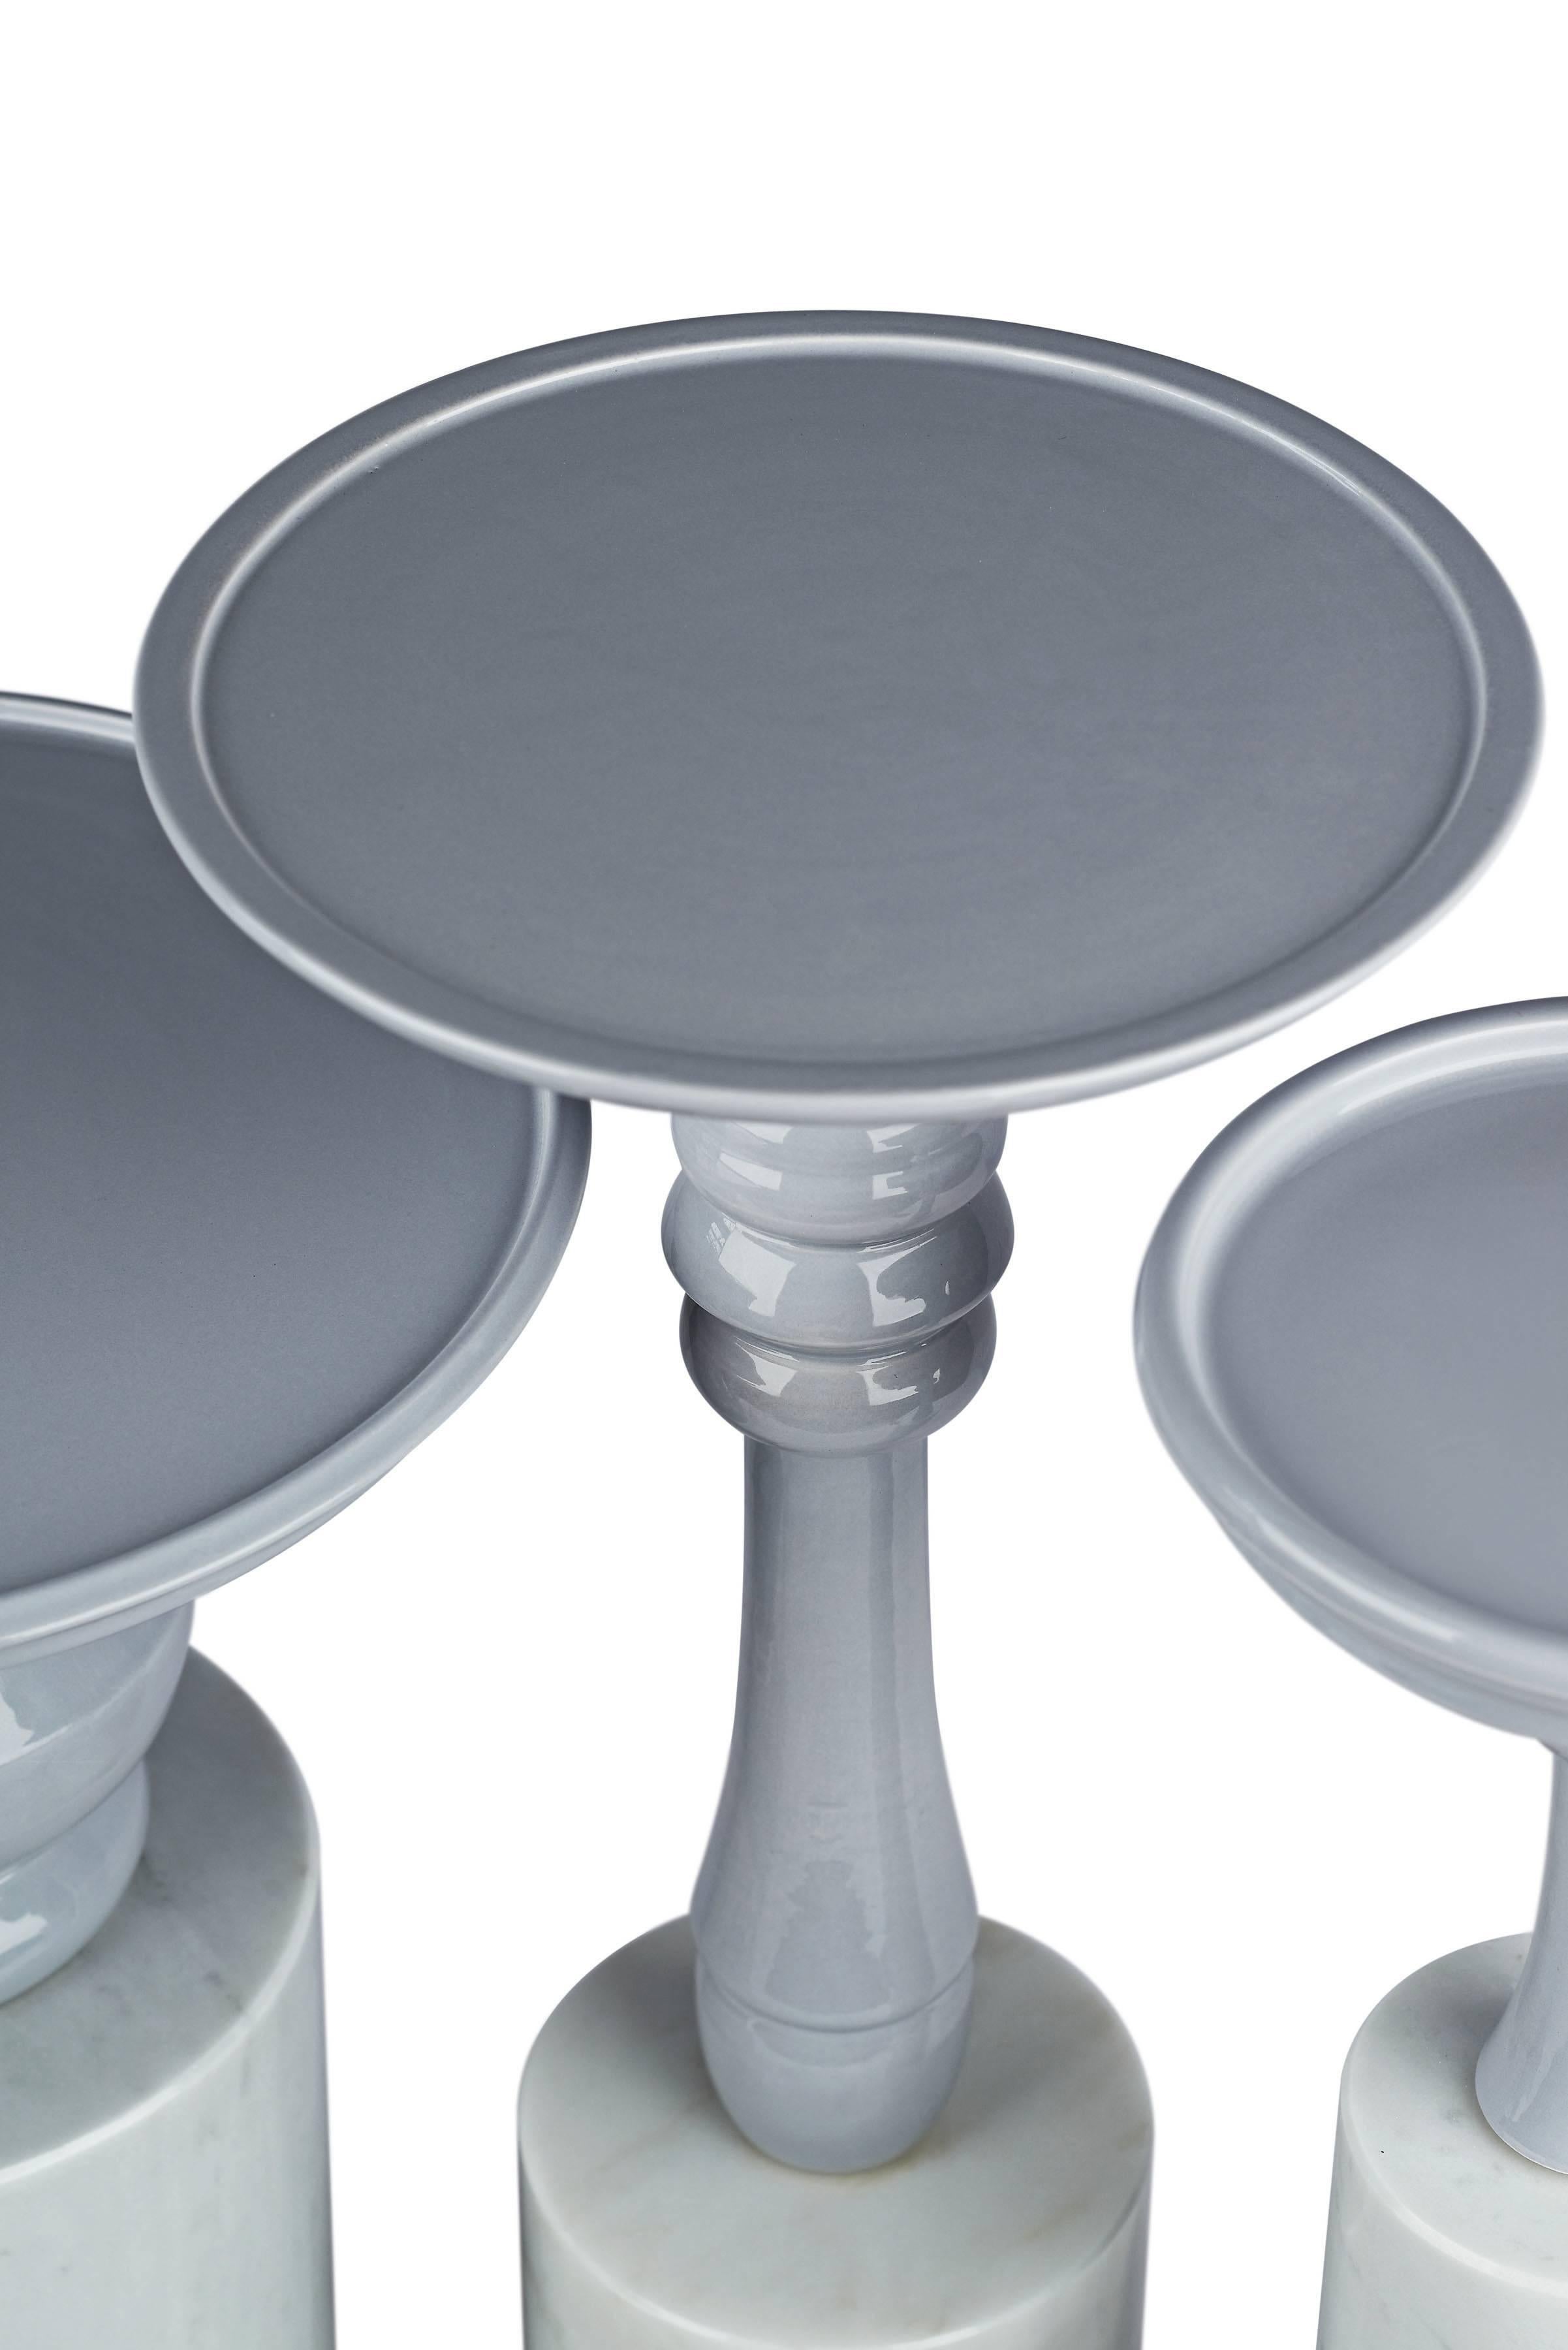 This set of four small tables are made of hand-glazed ceramic and Carrara marble. The overall dimensions of the four tables when placed together measure approximately 20” H x 28 3/4” W x 28 3/4” D. Each individual table's measurements vary from 14